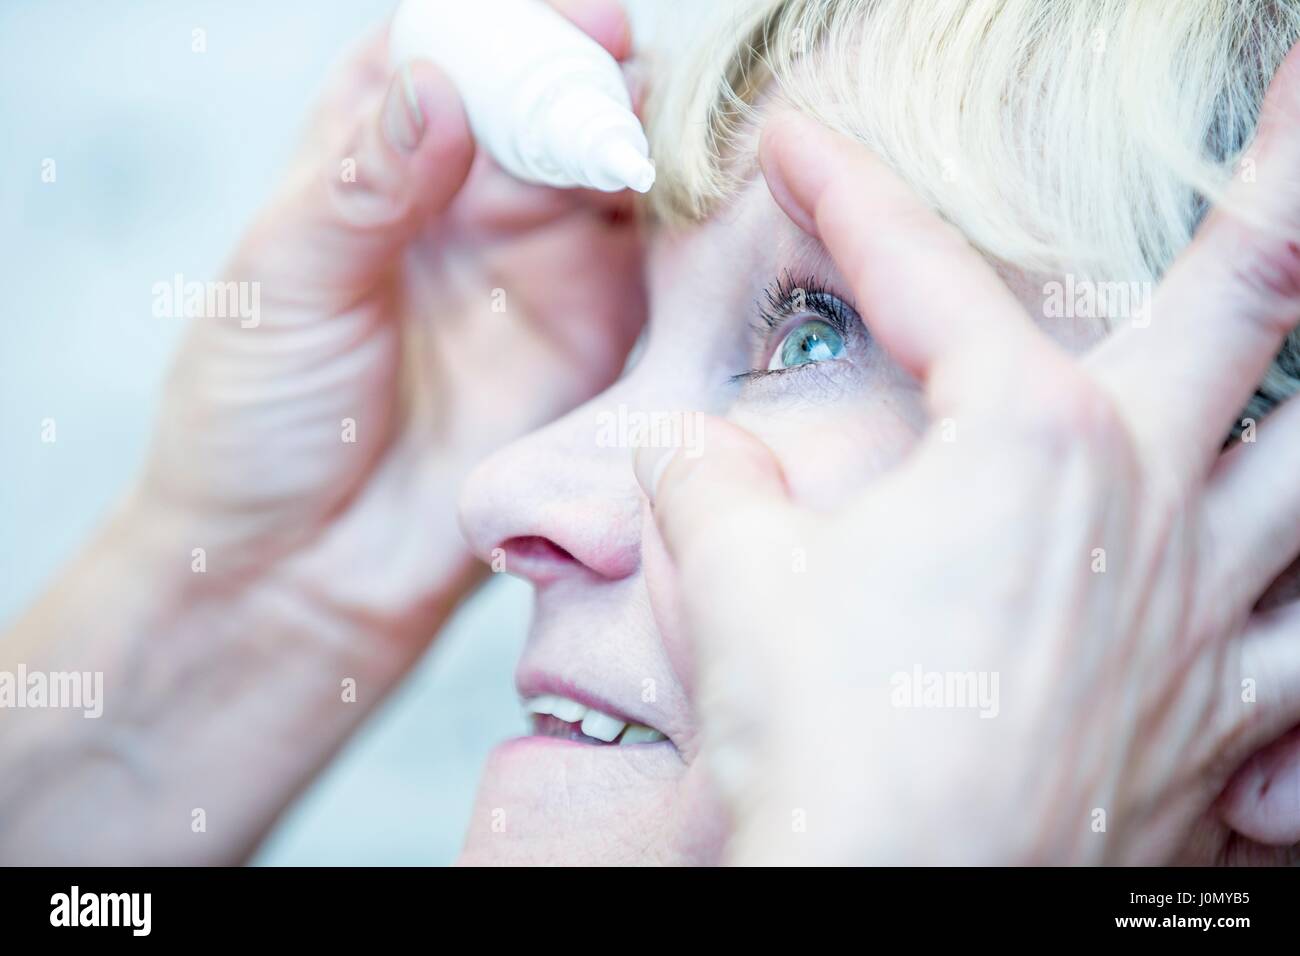 Close-up of person applying eye drops. Stock Photo